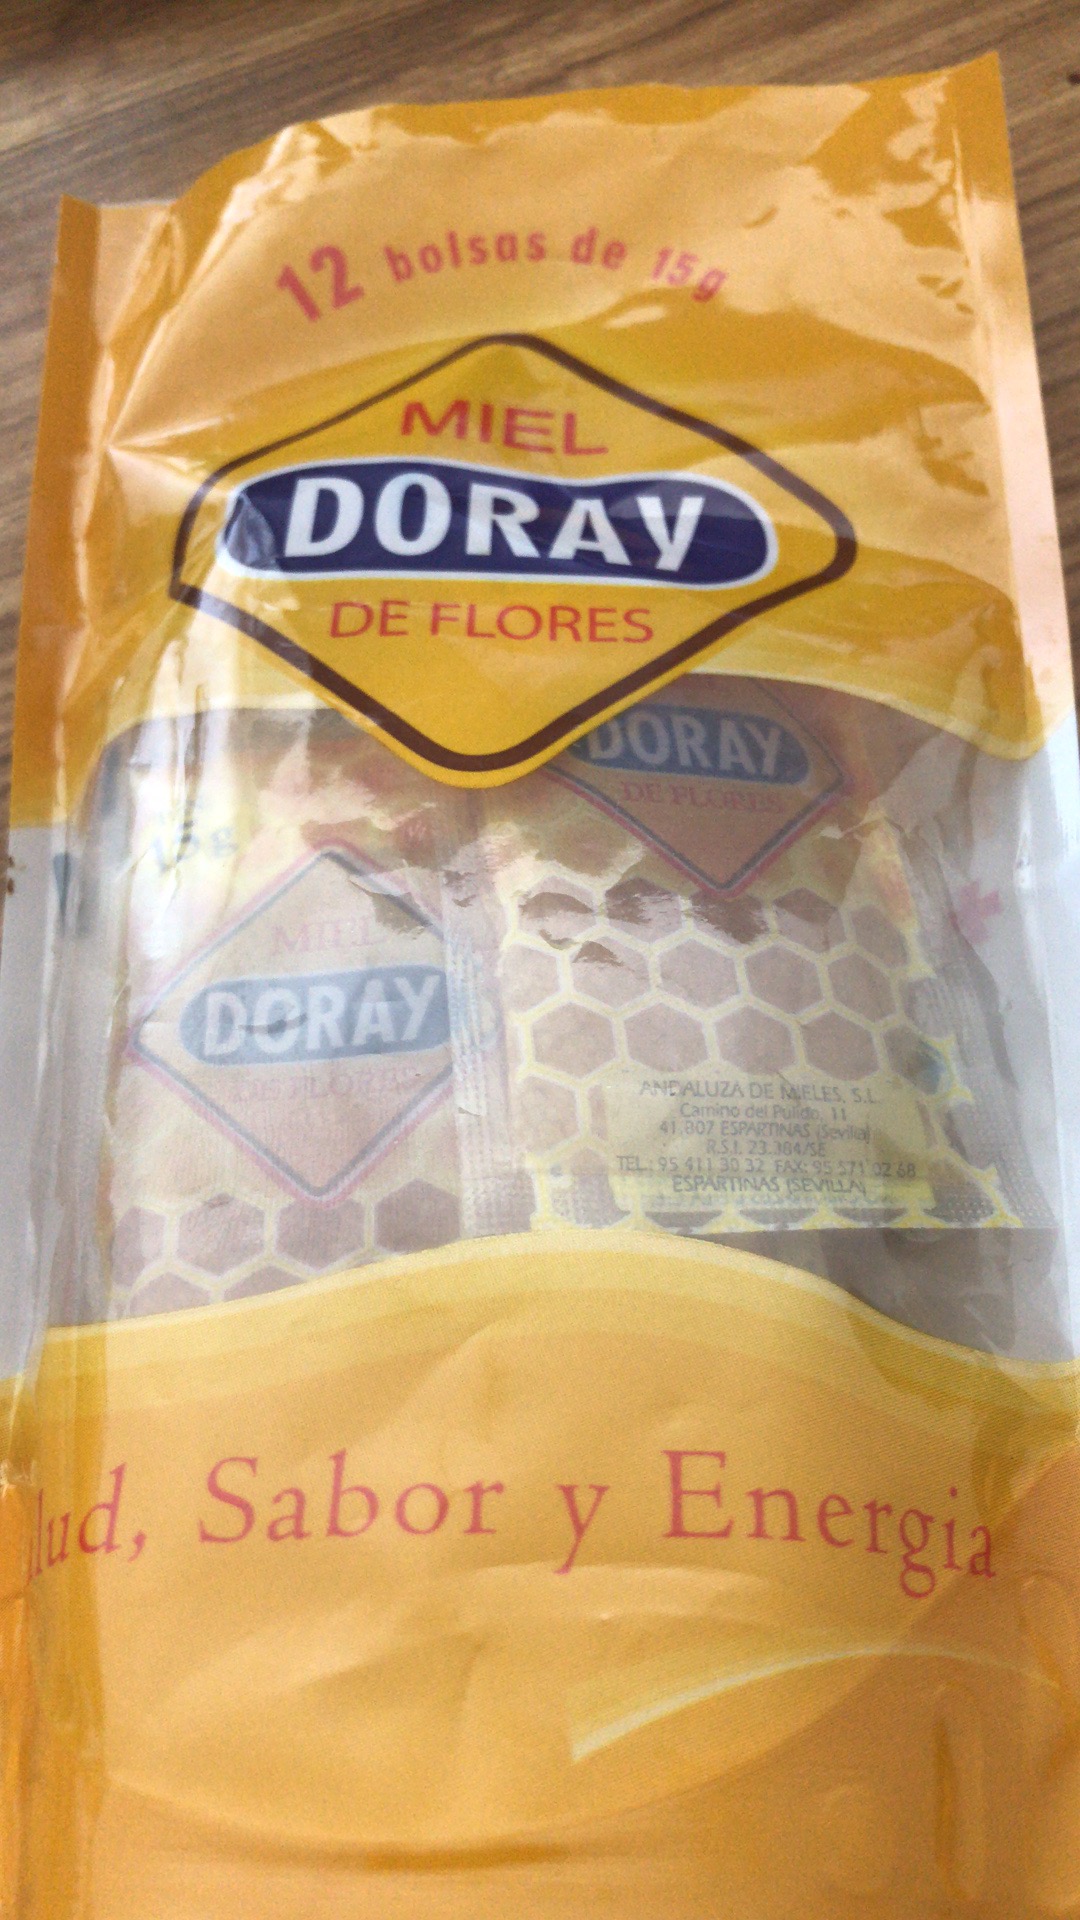 Doray hundred flowers honey is packed independently, super convenient!